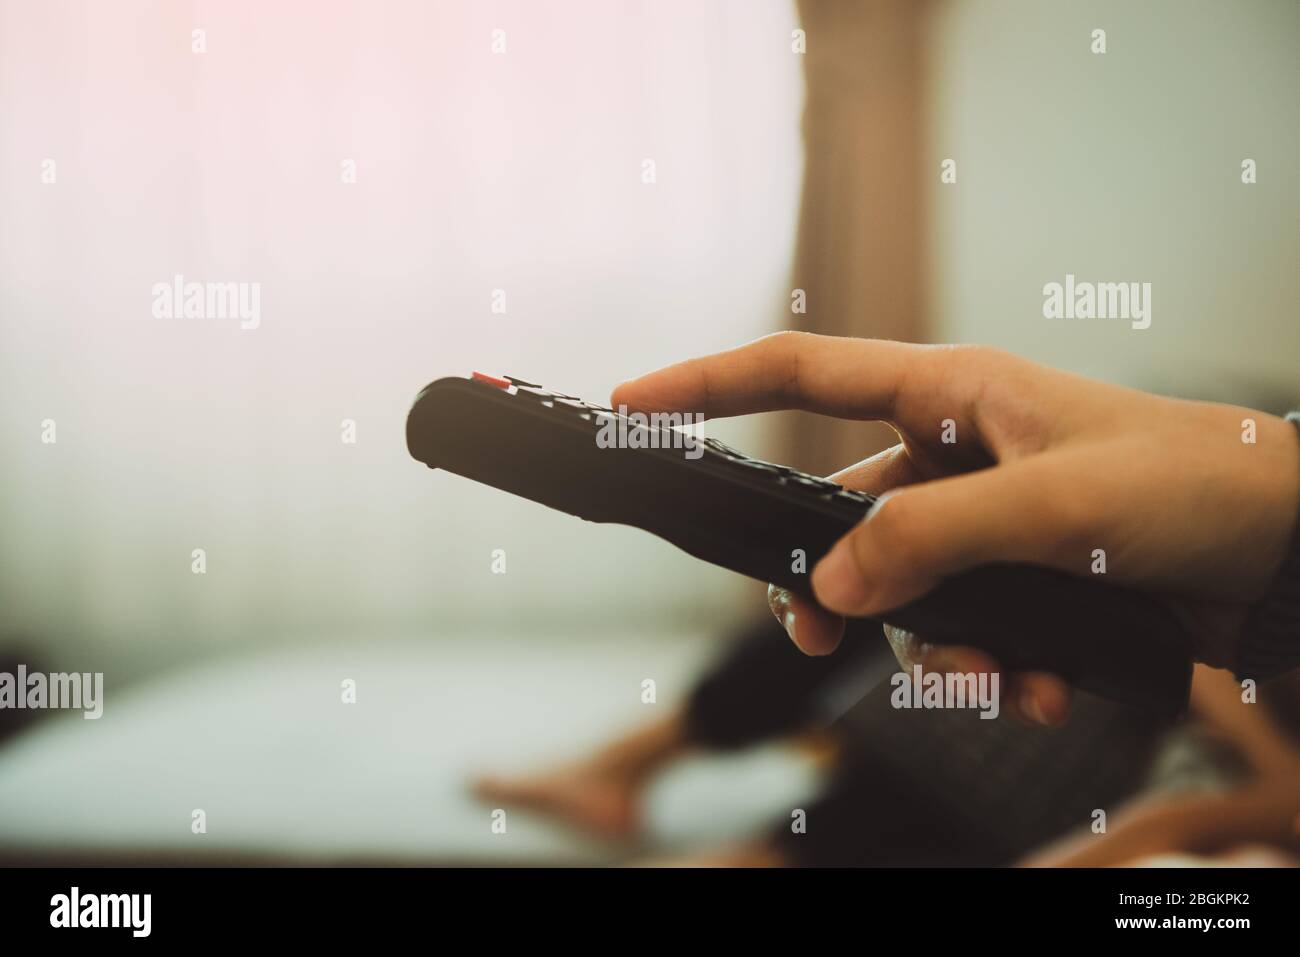 Grian and Noise Tone.Close-up of young woman holding remote control and turning on the TV while sitting on sofa at home.Stay at home Concept. Stock Photo